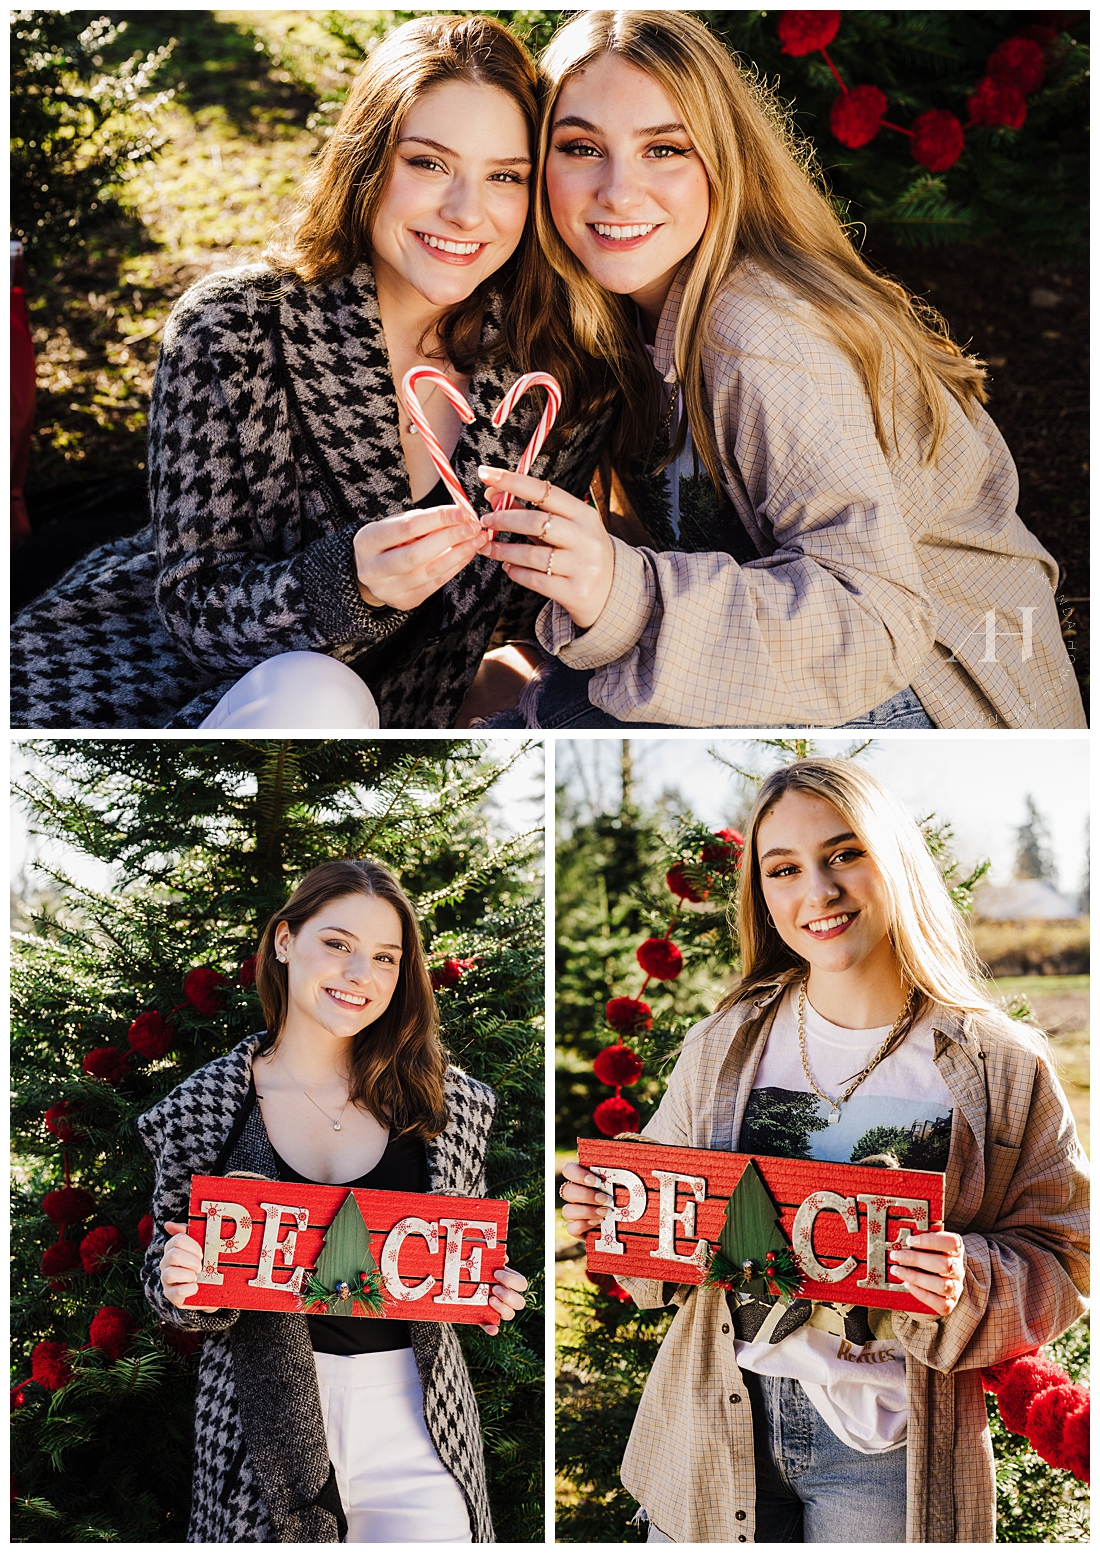 Outfit ideas for senior portraits in winter: cozy layers, festive props, and a holiday tree. | Photographed by Tacoma Senior Portrait Photographer Amanda Howse